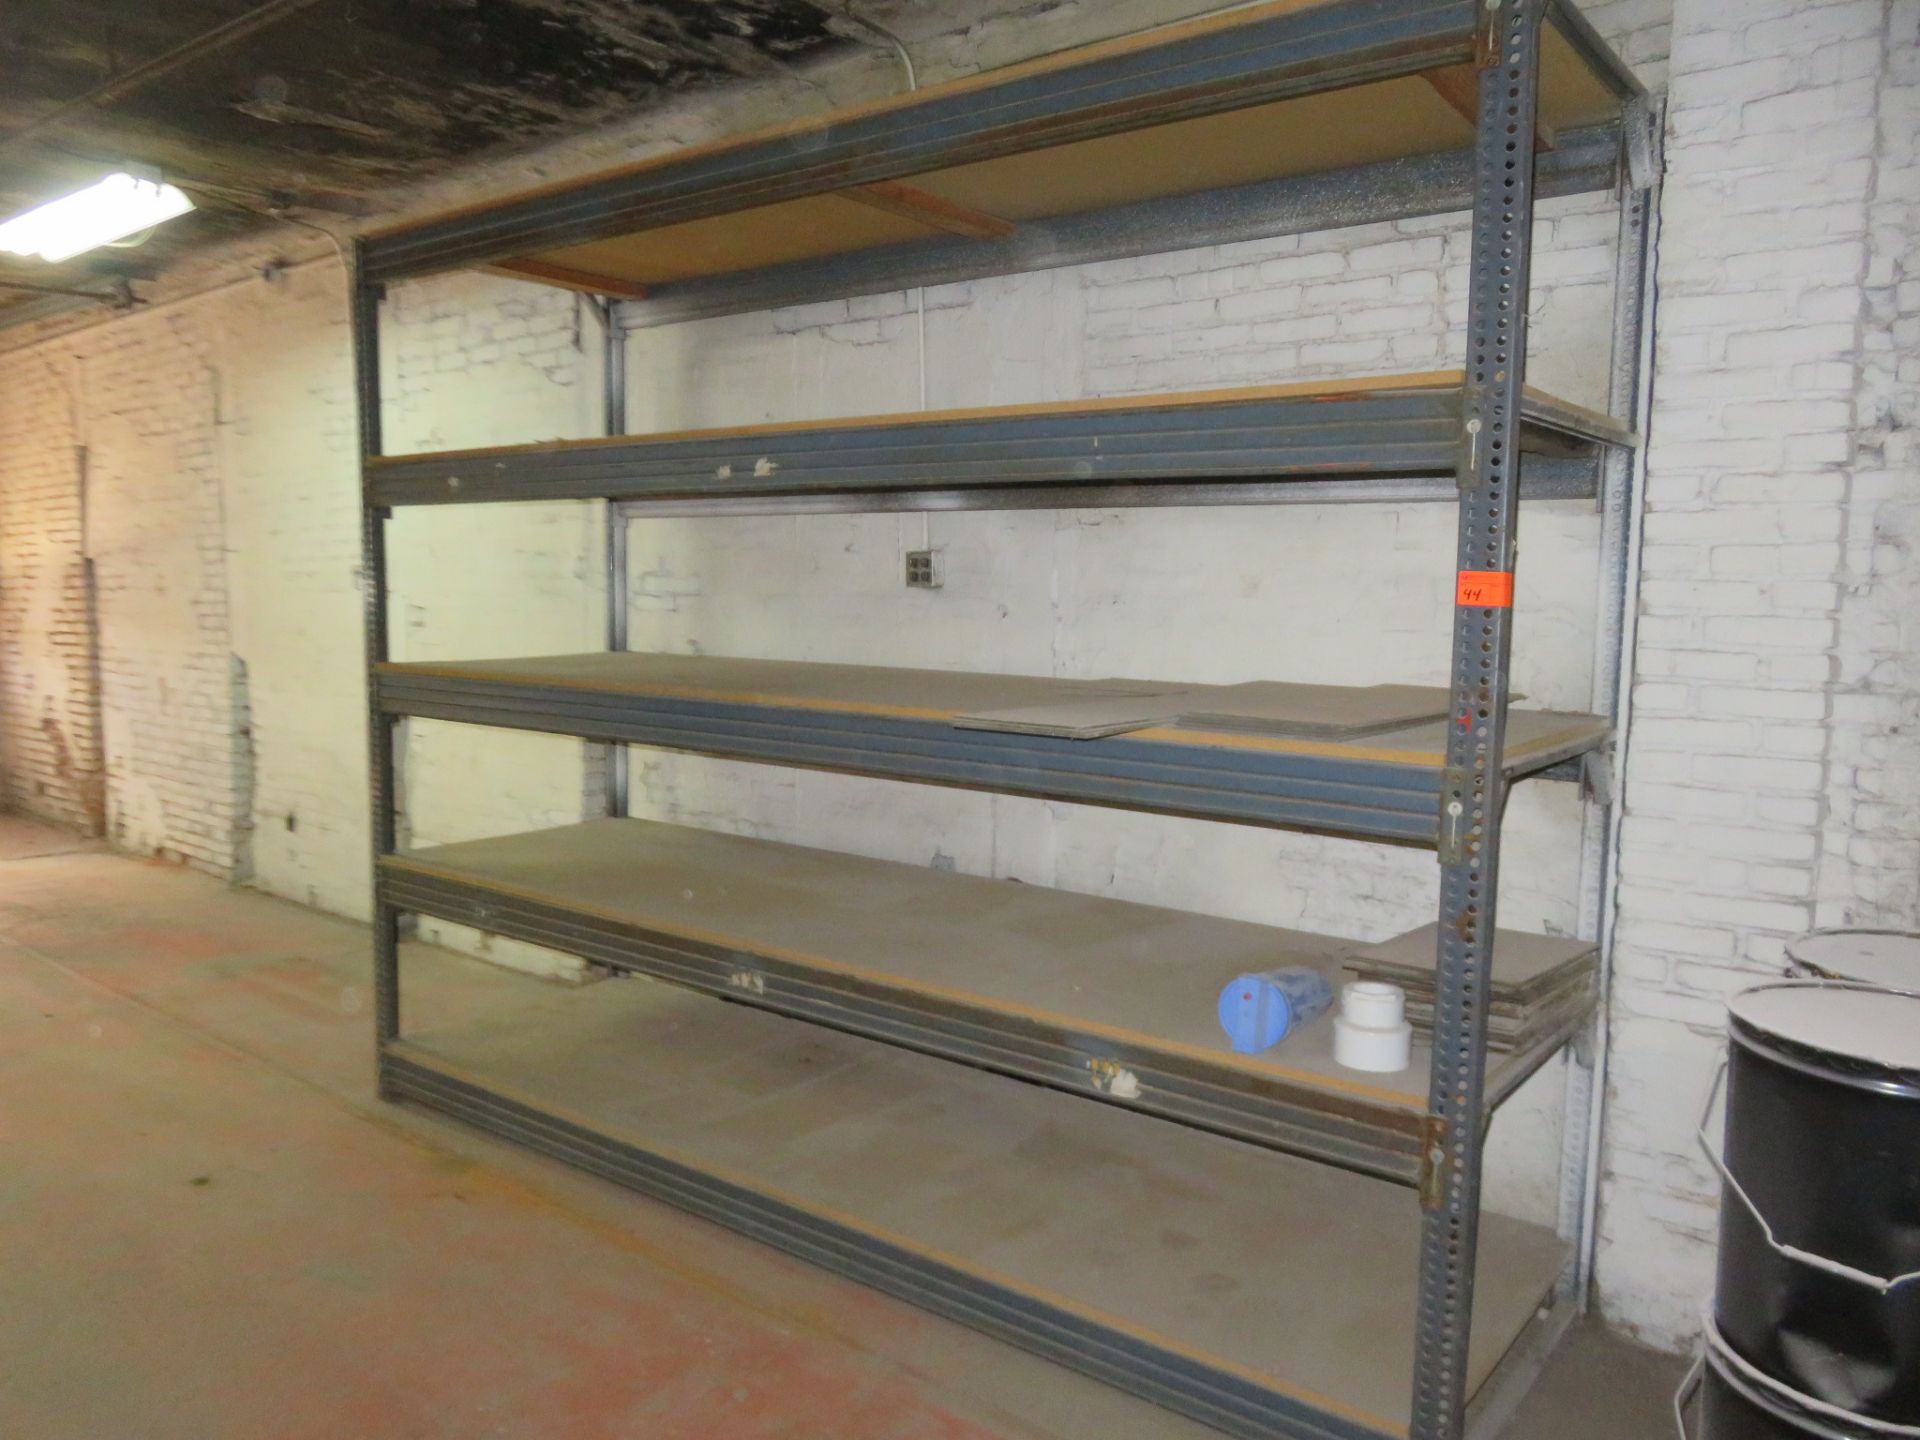 Warehouse Pallet Racking/ Wooden Shelving 1 Section approx. 126"x 36"x 98"